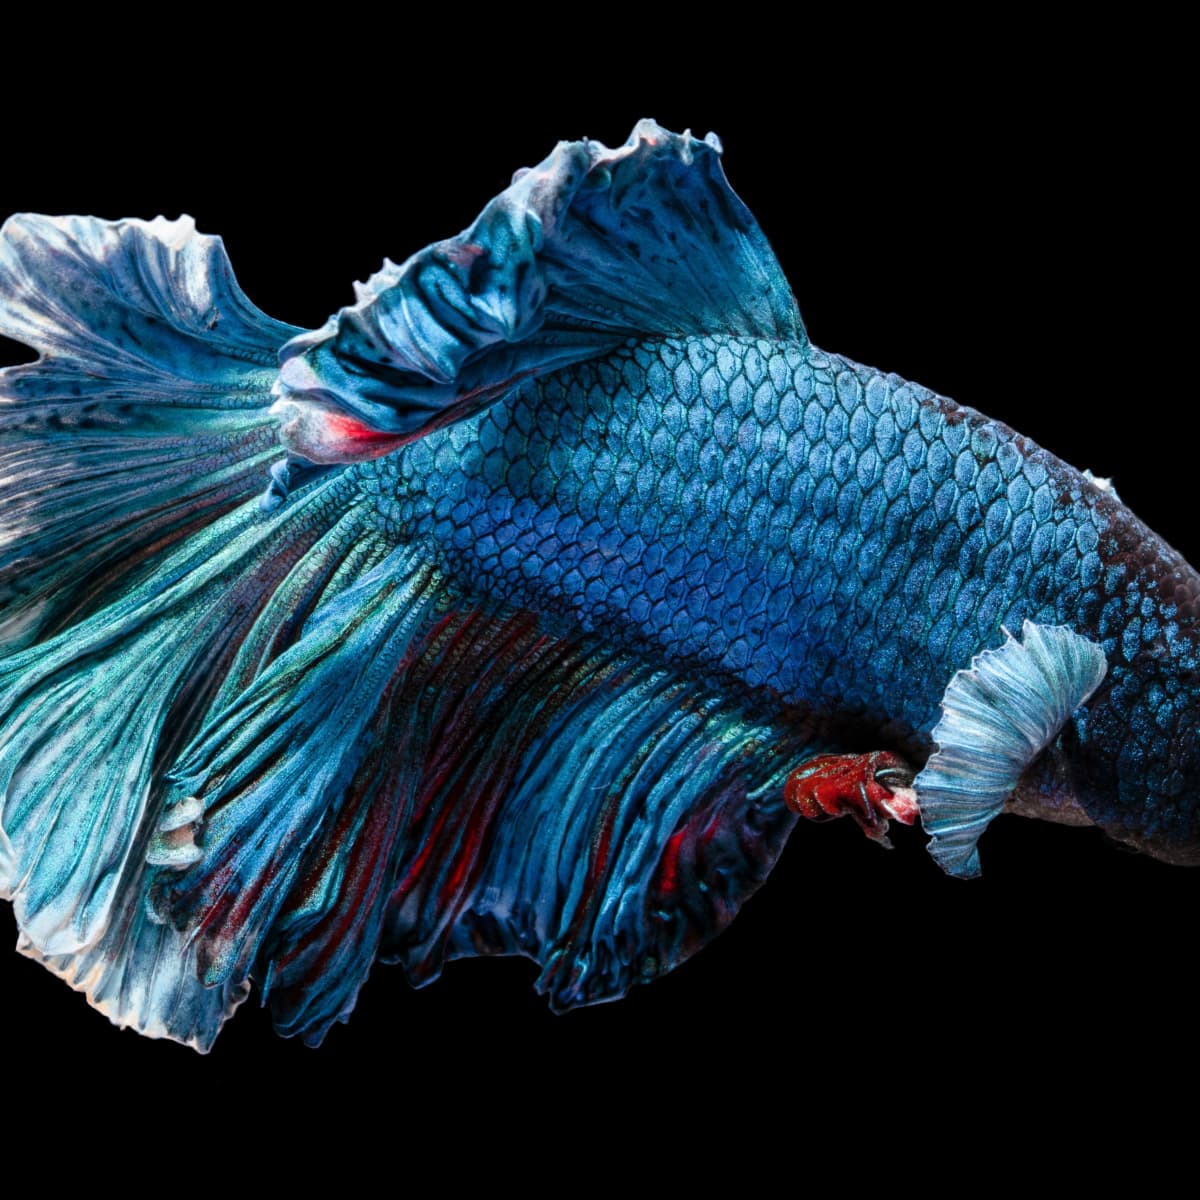 Delta Tail Betta Care Guide: From Tank Setup to Feeding